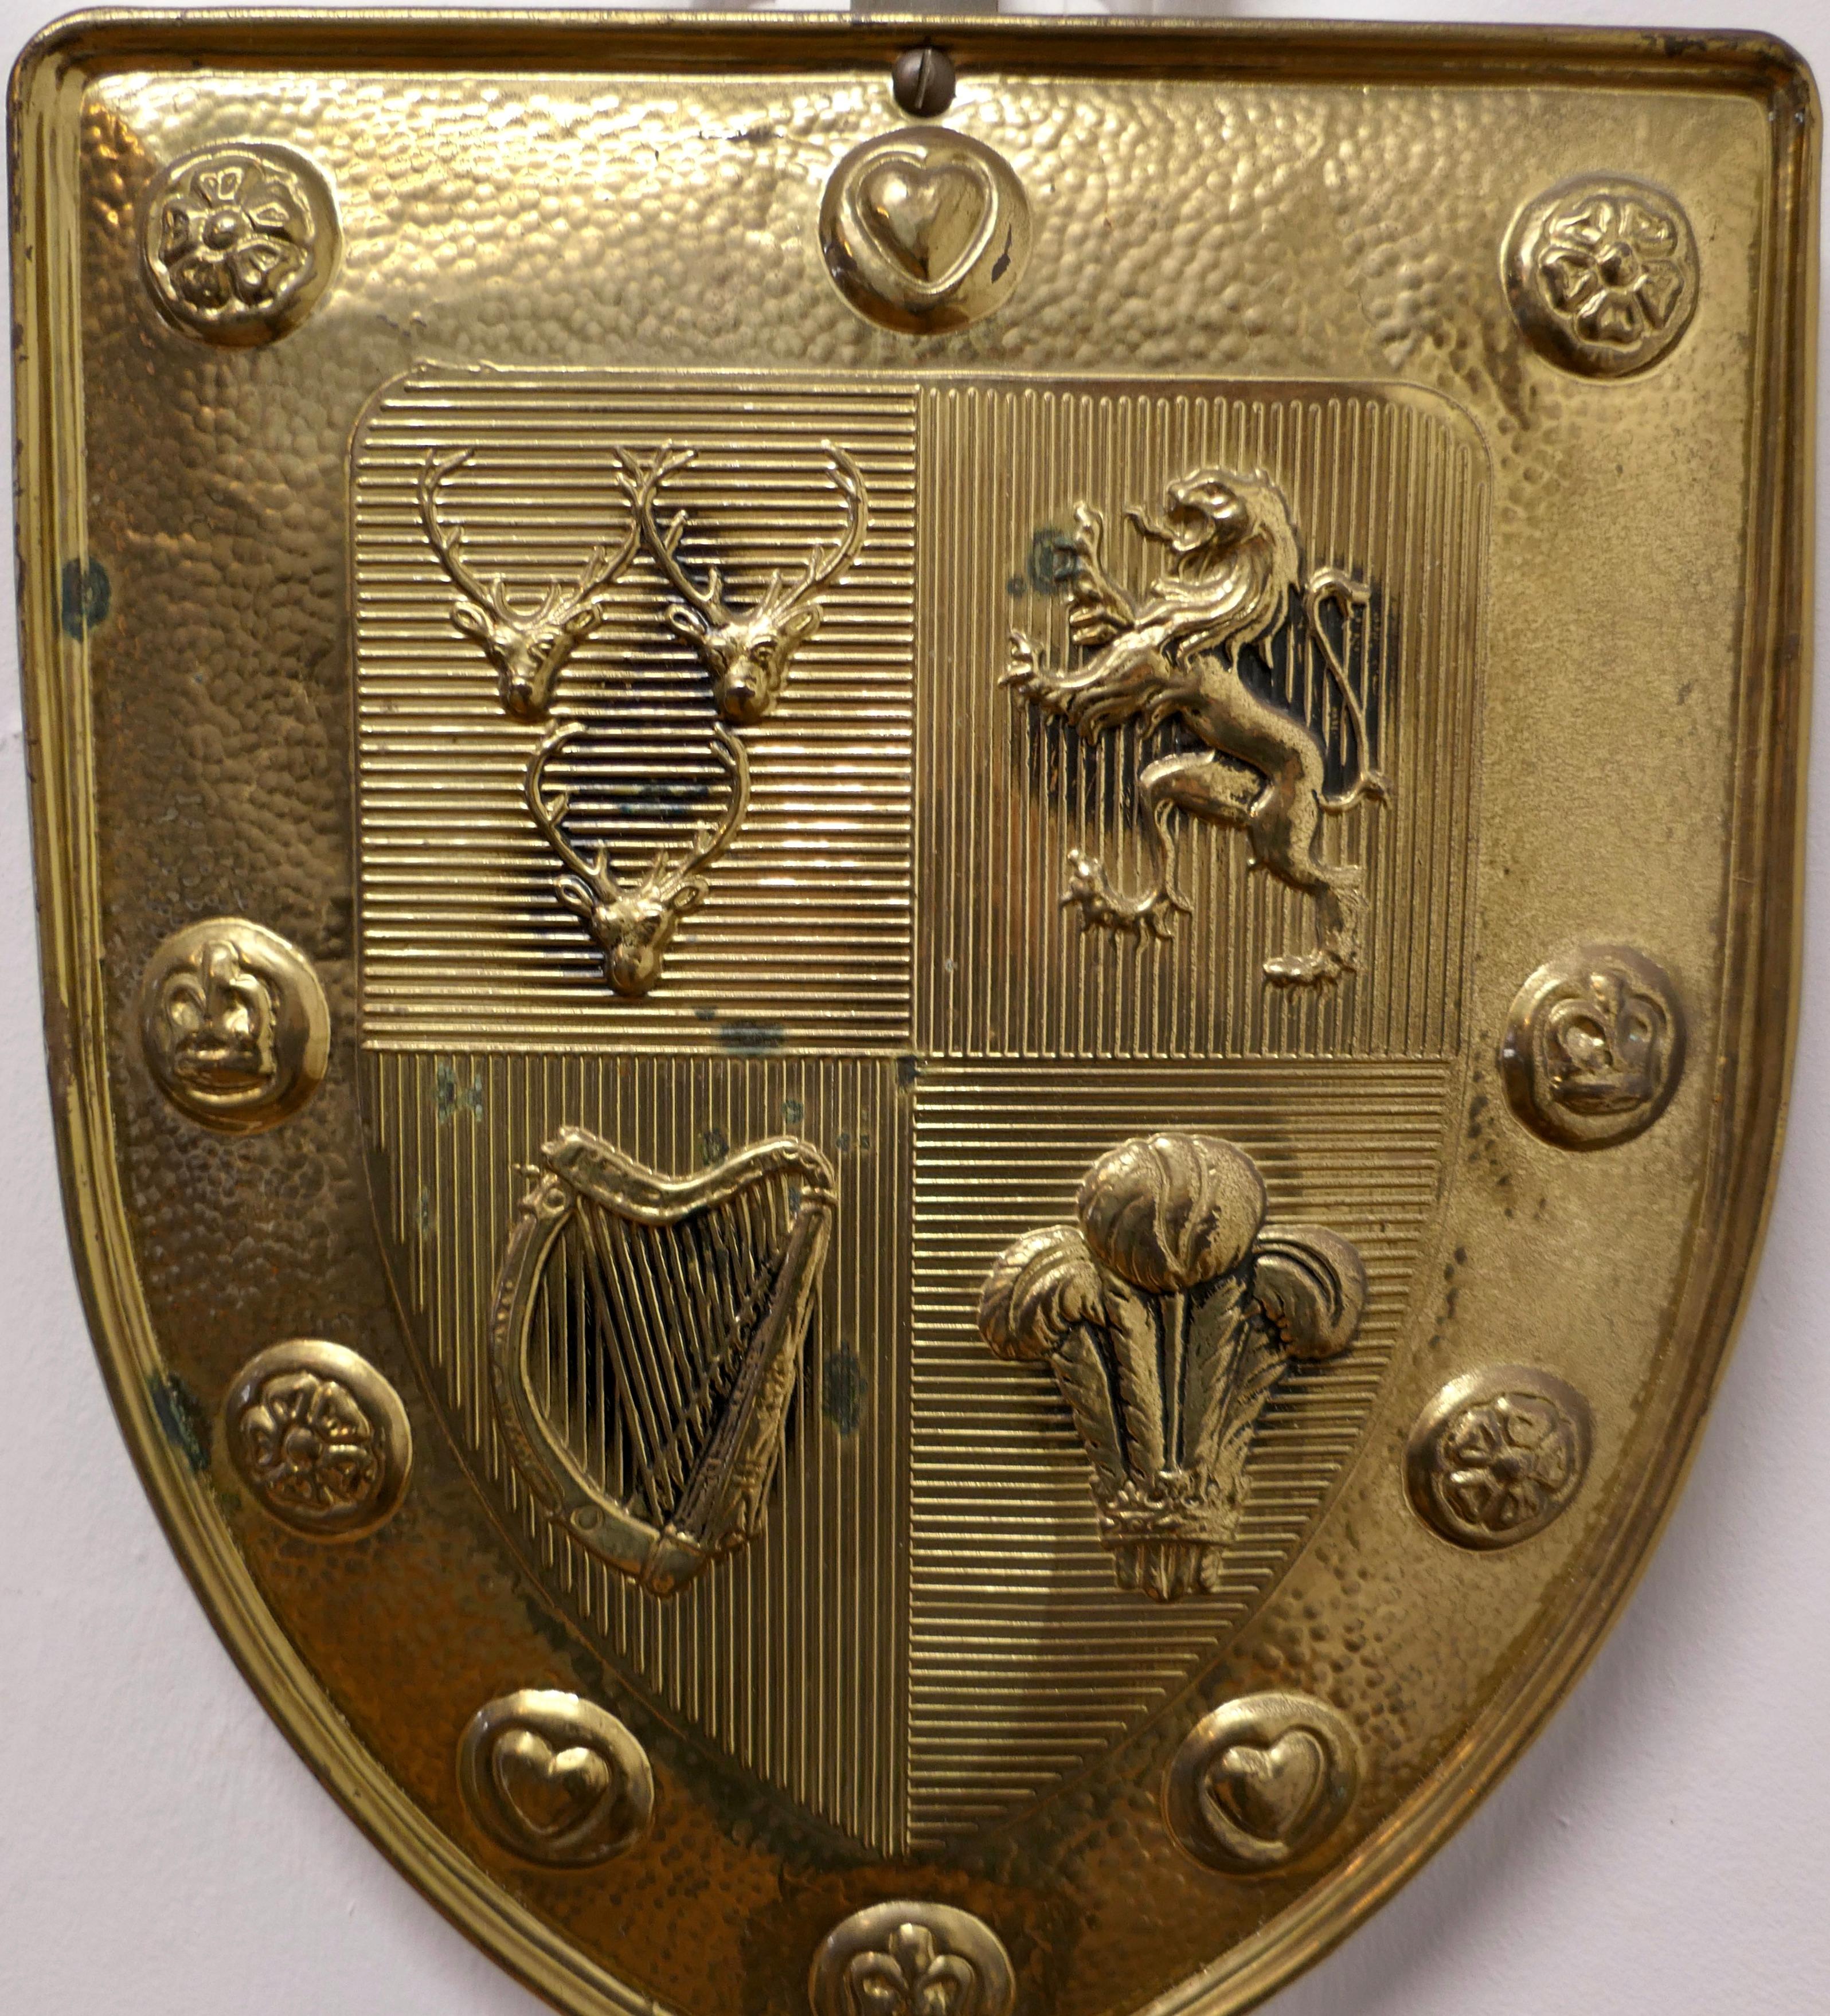  Wall Hanging Arts and Crafts Brass Shield with Sword 

This is a Decorative wall piece the shield is beaten and has a Lion Rampant, Prince of Wales Feathers, Stags and a Harp denoting all the country’s of the British Isles  
The sword is fixed held